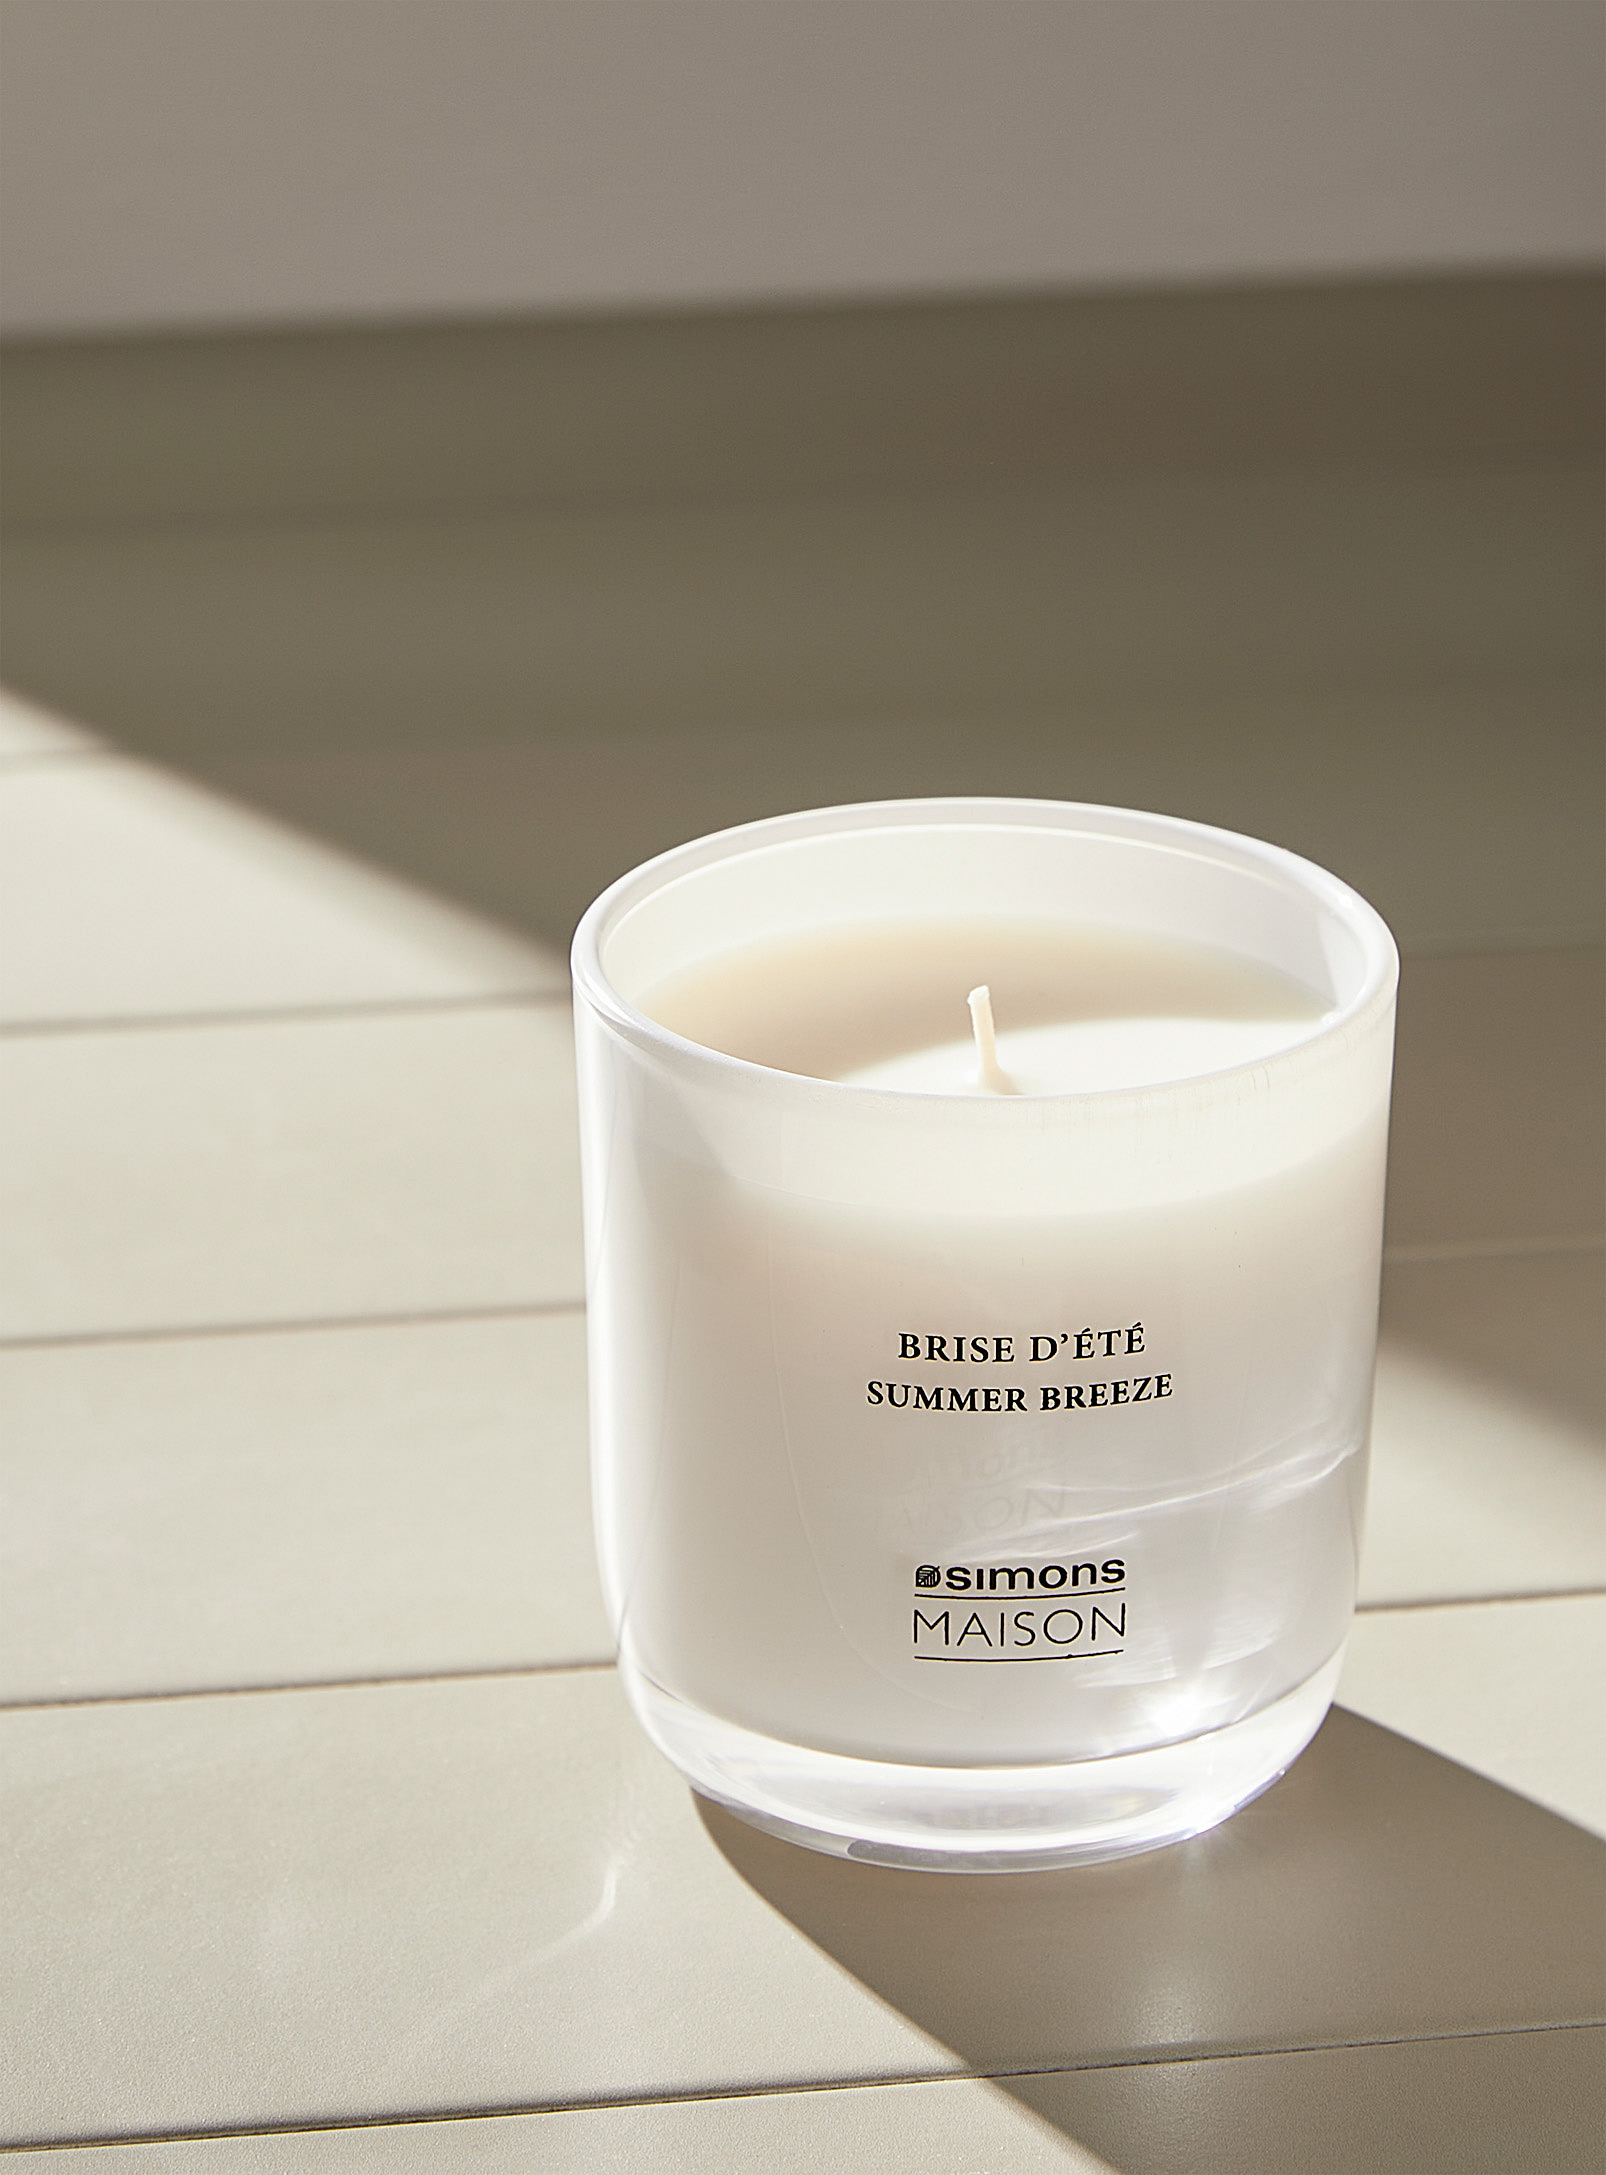 Simons Maison - Summer Breeze scented candle